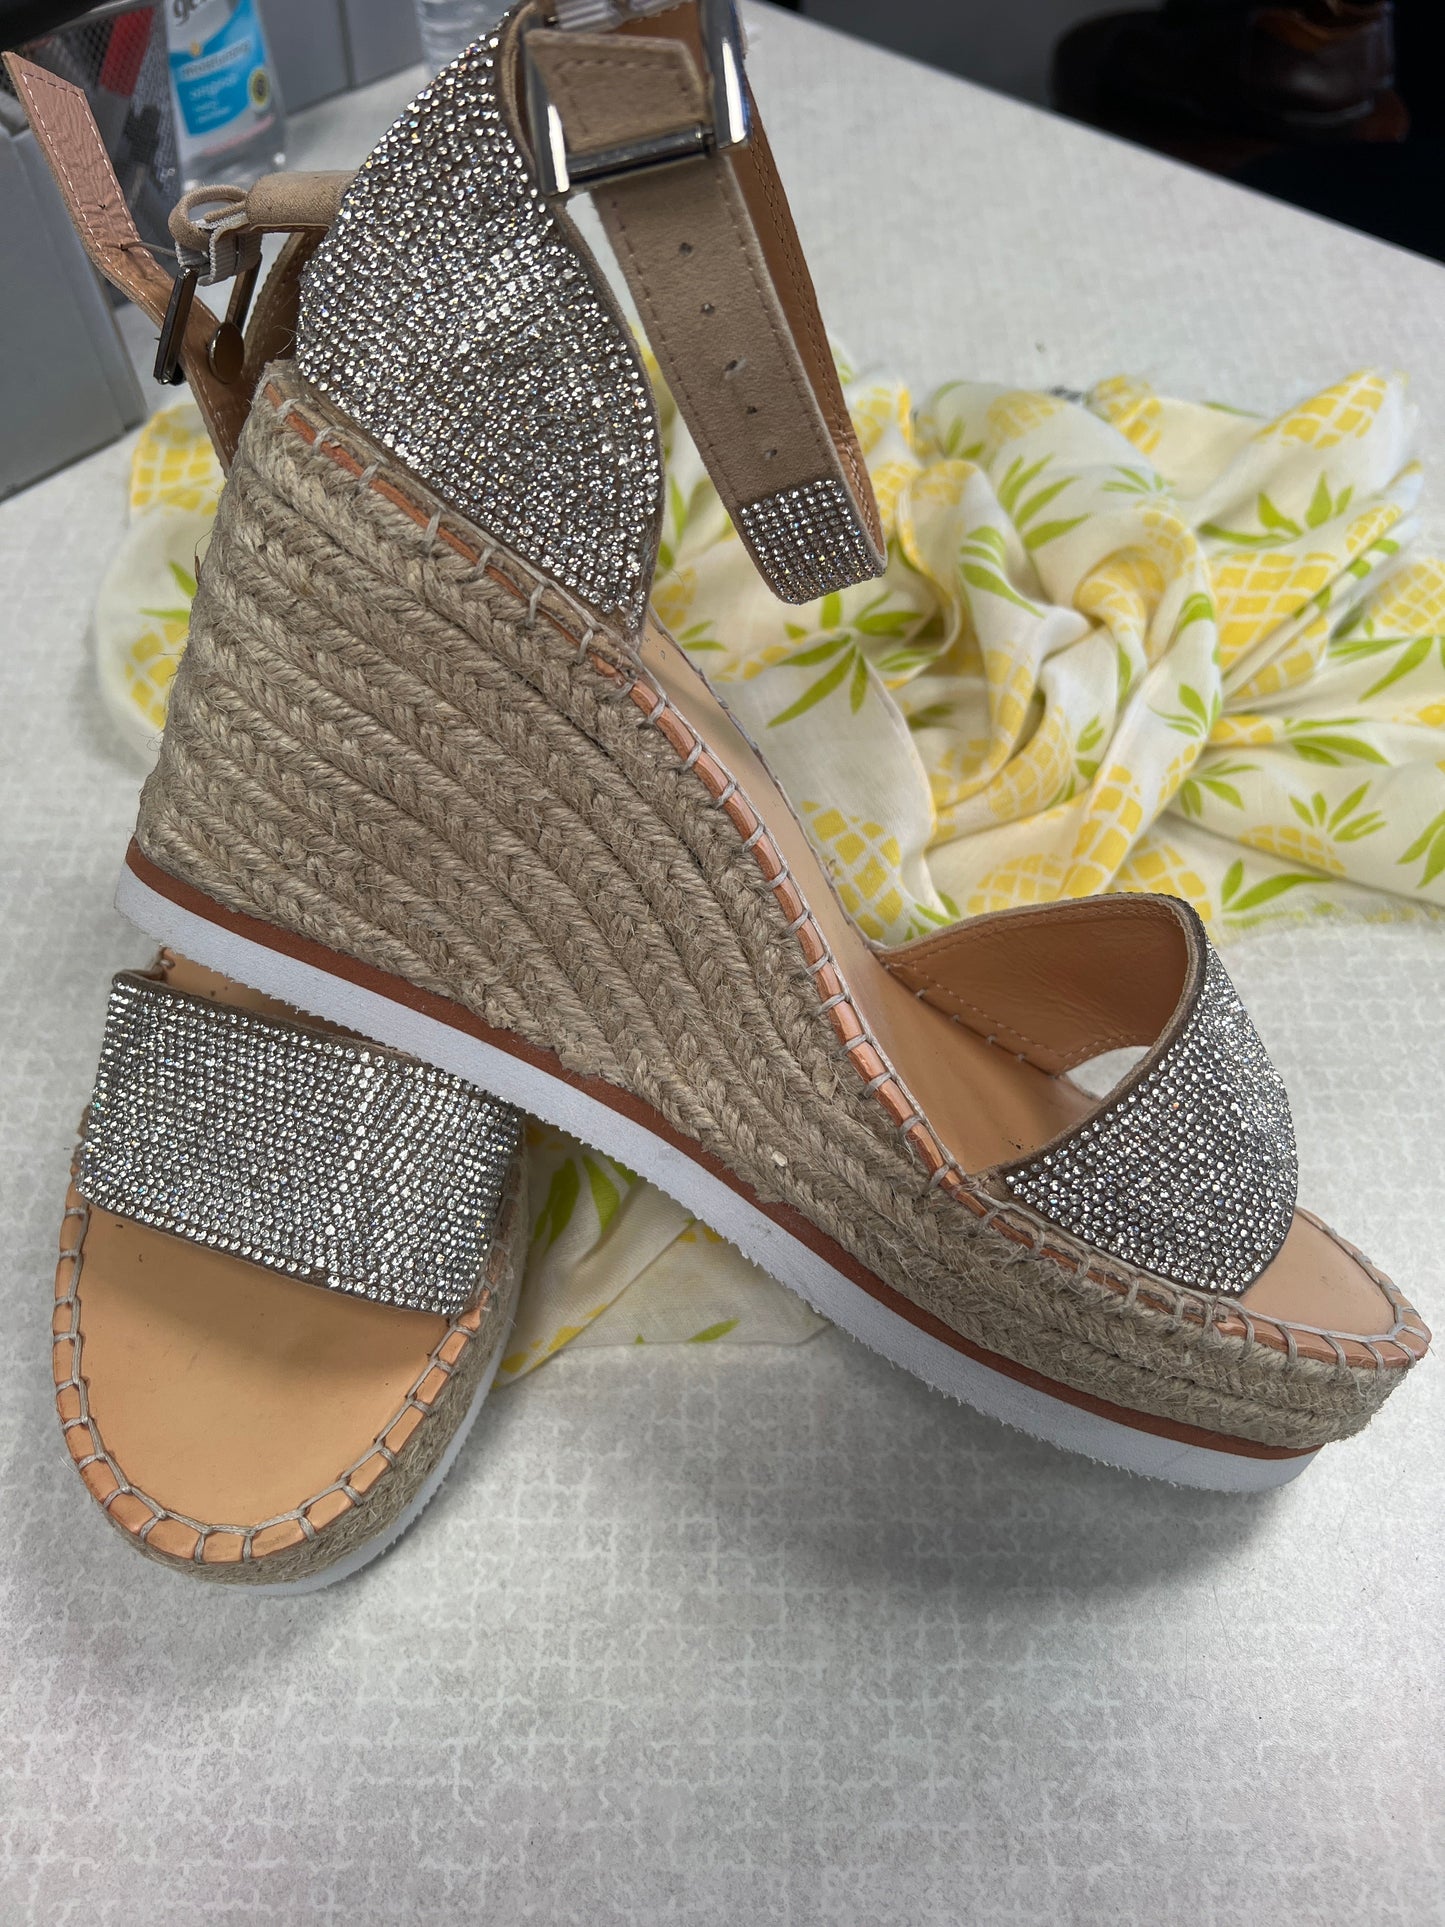 Shoes Heels Espadrille Wedge By Madden Girl  Size: 11